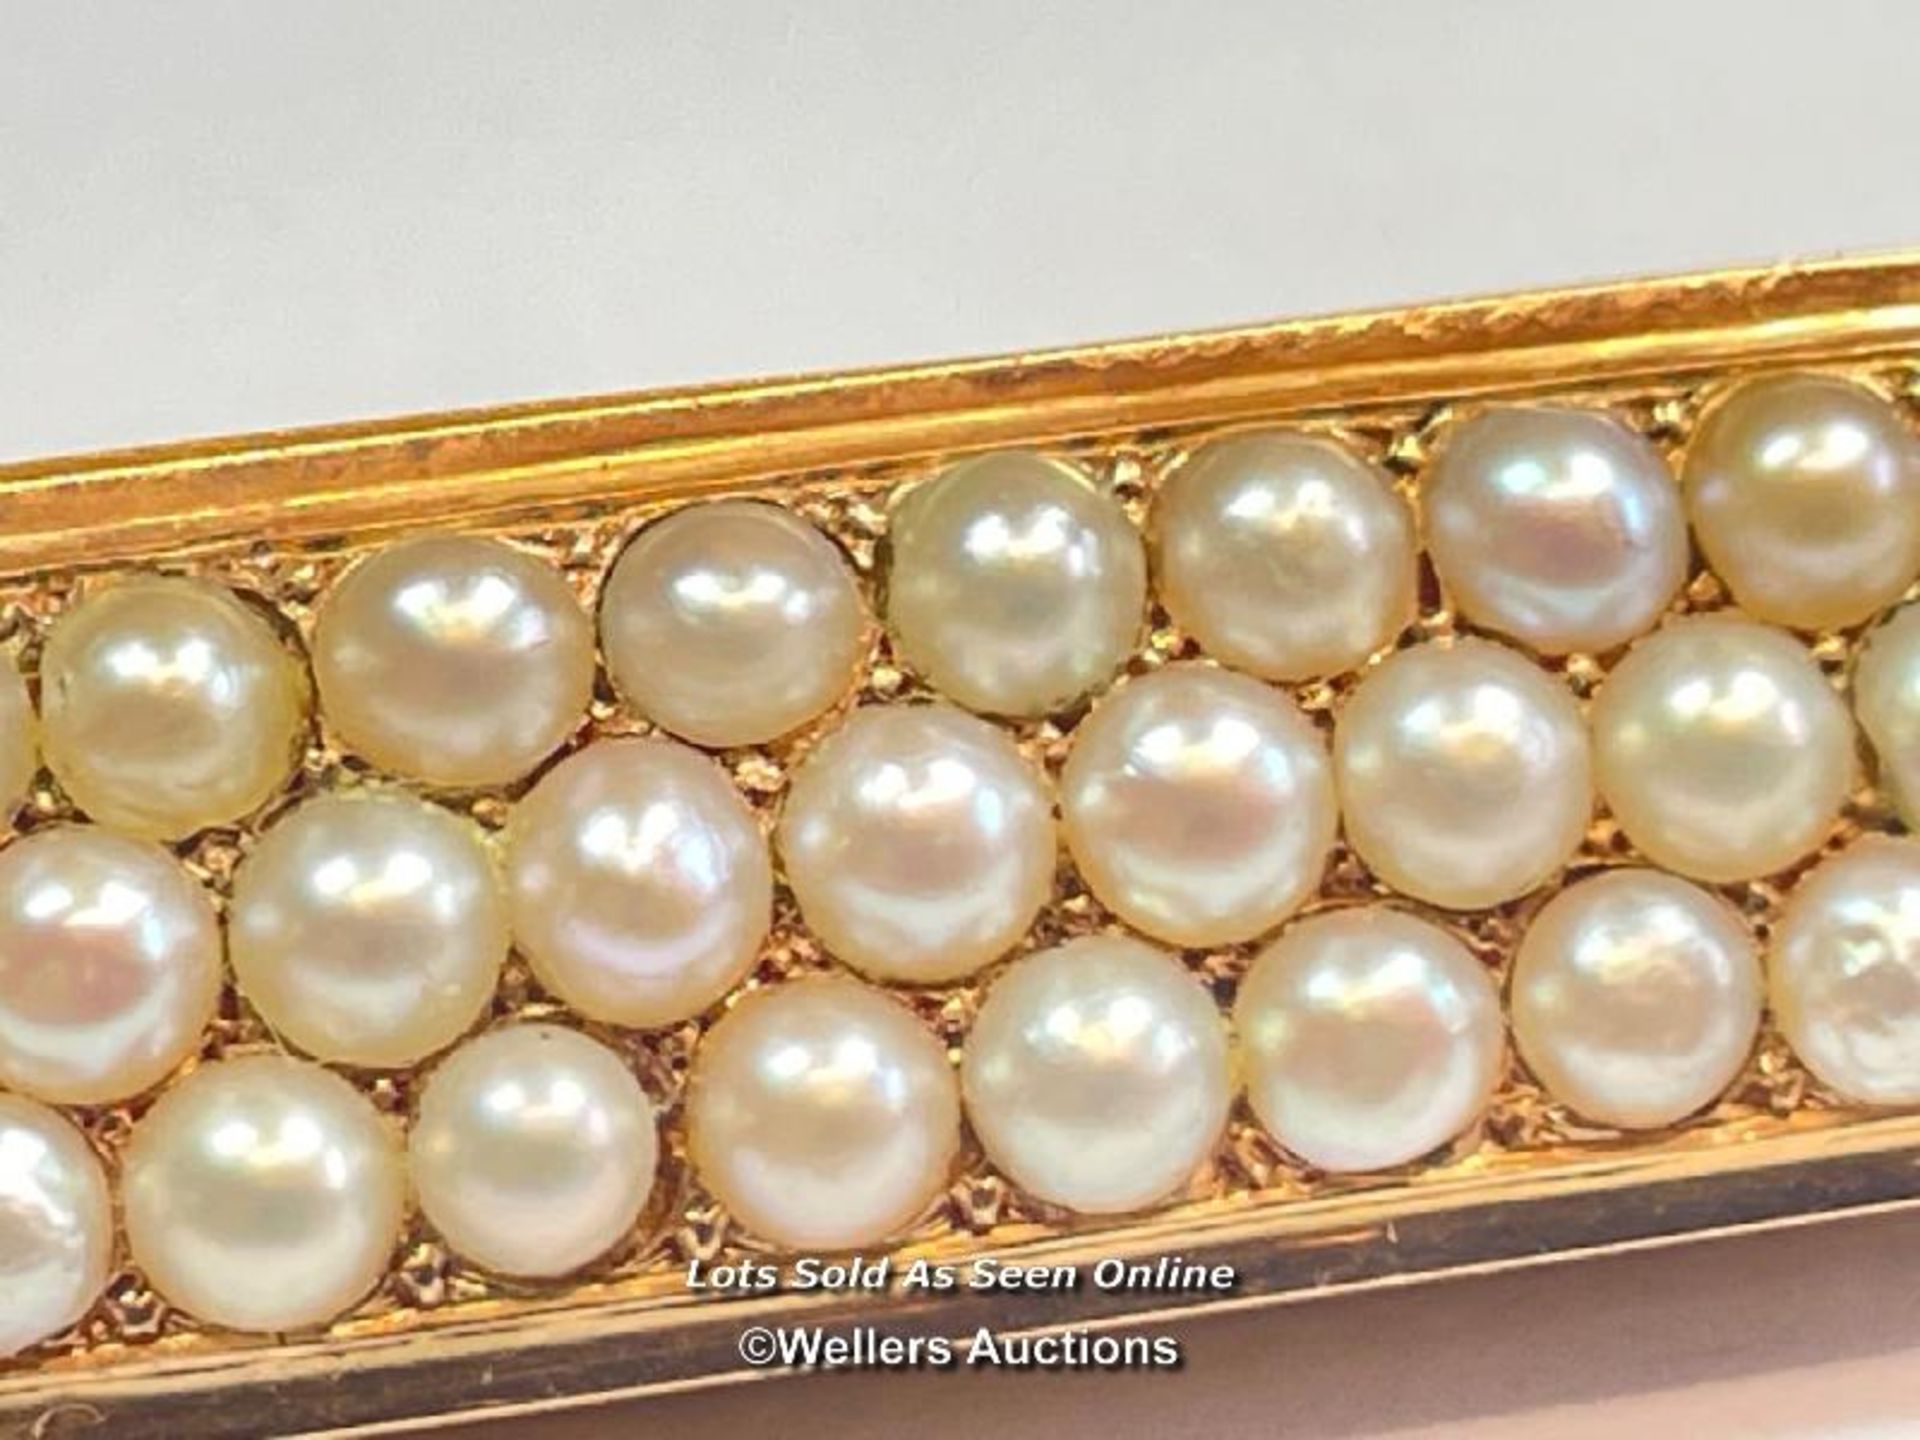 STOCK PIN / BROOCH IN YELLOW METAL WITH THREE ROWS OF SPLIT PEARLS AND ROSE CUT DIAMOND - Image 2 of 5